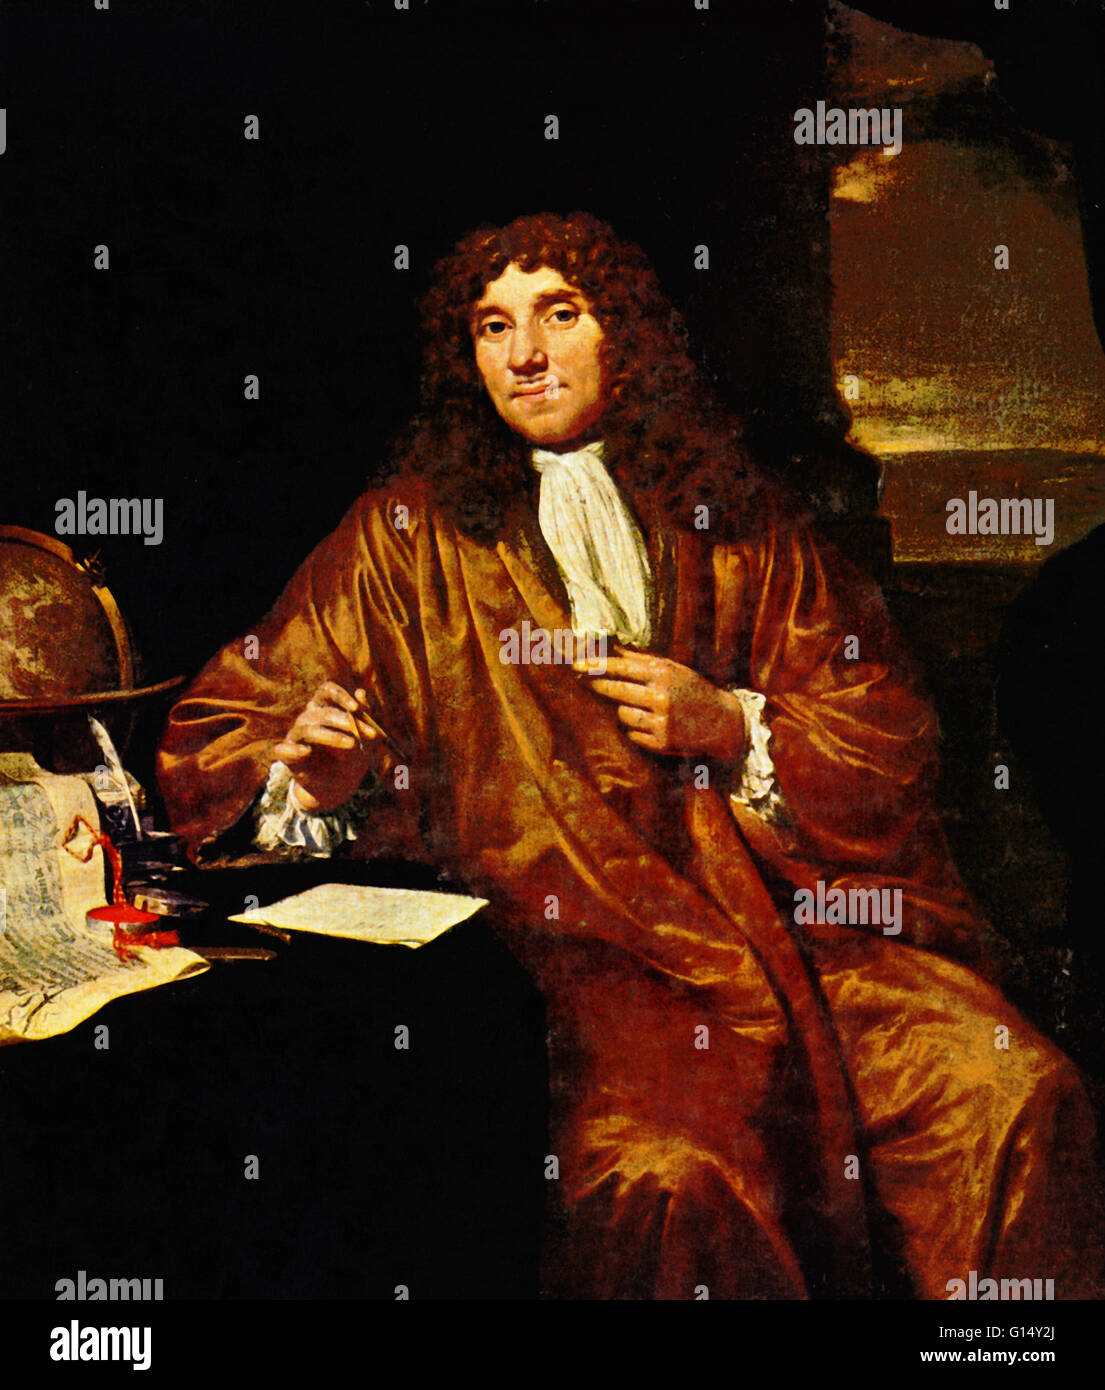 Antonie Philips van Leeuwenhoek (1632-1723) was a Dutch tradesman and scientist. He is known "the Father of Microbiology", and considered to be the first microbiologist. He is best known for his